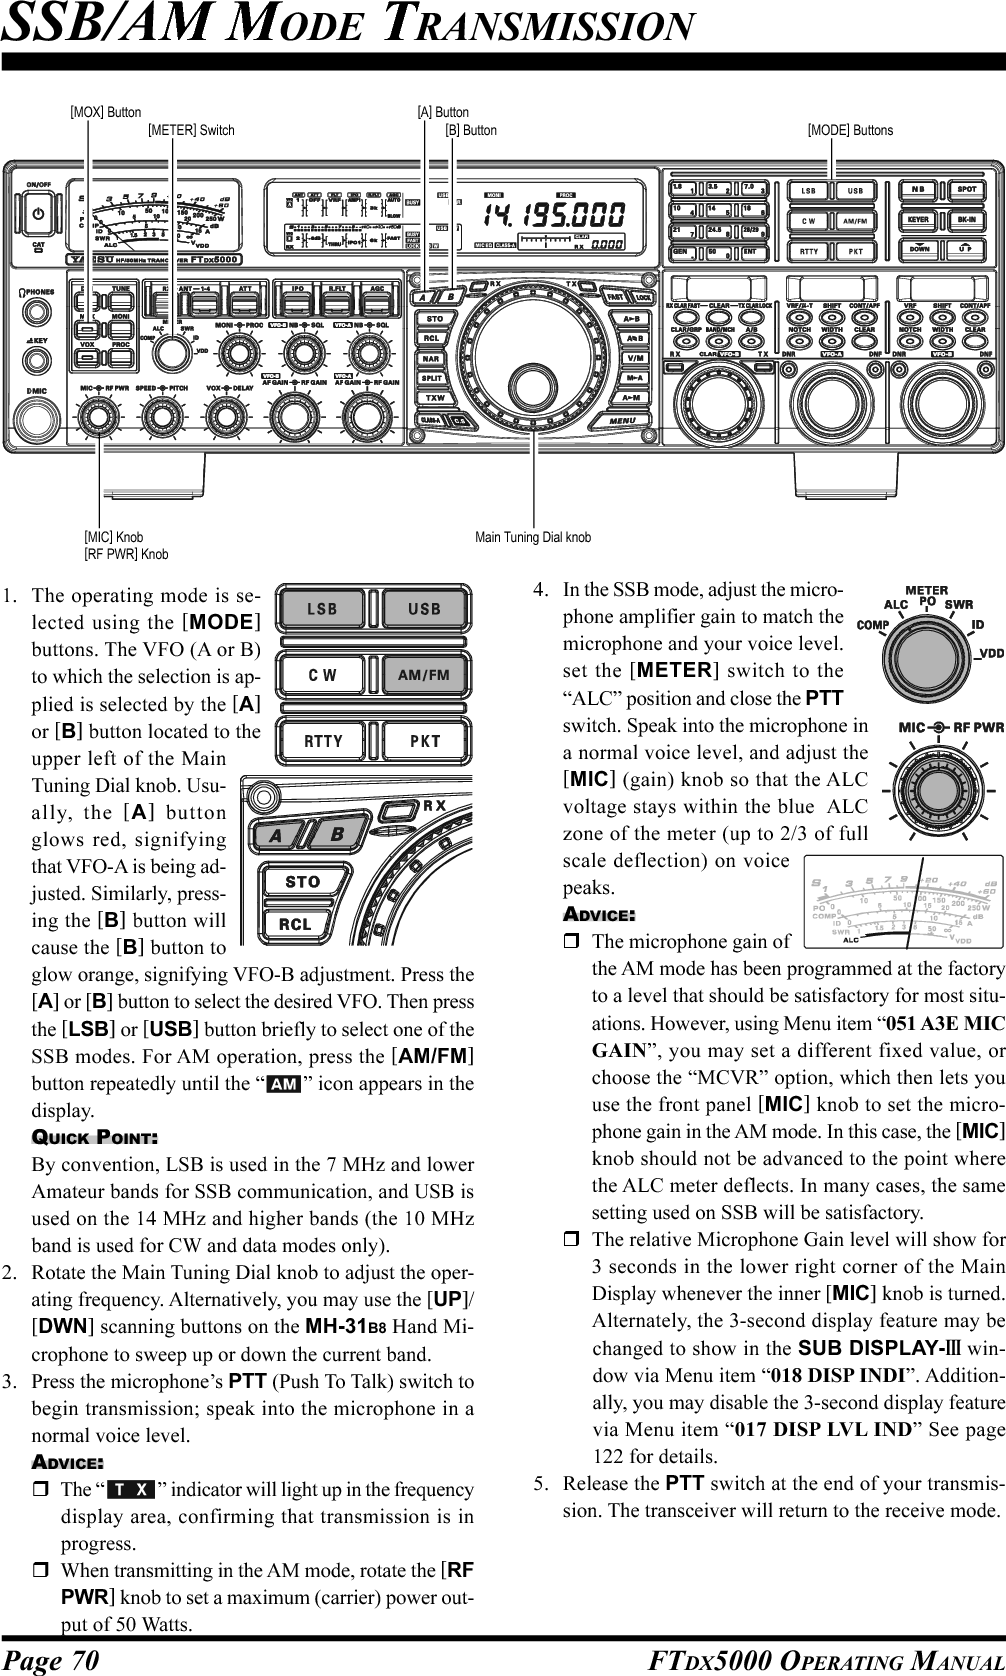 Page 70 FTDX5000 OPERATING MANUAL1. The operating mode is se-lected using the [MODE]buttons. The VFO (A or B)to which the selection is ap-plied is selected by the [A]or [B] button located to theupper left of the MainTuning Dial knob. Usu-ally, the [A] buttonglows red, signifyingthat VFO-A is being ad-justed. Similarly, press-ing the [B] button willcause the [B] button toglow orange, signifying VFO-B adjustment. Press the[A] or [B] button to select the desired VFO. Then pressthe [LSB] or [USB] button briefly to select one of theSSB modes. For AM operation, press the [AM/FM]button repeatedly until the “ ” icon appears in thedisplay.QUICK POINT:By convention, LSB is used in the 7 MHz and lowerAmateur bands for SSB communication, and USB isused on the 14 MHz and higher bands (the 10 MHzband is used for CW and data modes only).2. Rotate the Main Tuning Dial knob to adjust the oper-ating frequency. Alternatively, you may use the [UP]/[DWN] scanning buttons on the MH-31B8 Hand Mi-crophone to sweep up or down the current band.3. Press the microphone’s PTT (Push To Talk) switch tobegin transmission; speak into the microphone in anormal voice level.ADVICE:The “ ” indicator will light up in the frequencydisplay area, confirming that transmission is inprogress.When transmitting in the AM mode, rotate the [RFPWR] knob to set a maximum (carrier) power out-put of 50 Watts.4. In the SSB mode, adjust the micro-phone amplifier gain to match themicrophone and your voice level.set the [METER] switch to the“ALC” position and close the PTTswitch. Speak into the microphone ina normal voice level, and adjust the[MIC] (gain) knob so that the ALCvoltage stays within the blue  ALCzone of the meter (up to 2/3 of fullscale deflection) on voicepeaks.ADVICE:The microphone gain ofthe AM mode has been programmed at the factoryto a level that should be satisfactory for most situ-ations. However, using Menu item “051 A3E MICGAIN”, you may set a different fixed value, orchoose the “MCVR” option, which then lets youuse the front panel [MIC] knob to set the micro-phone gain in the AM mode. In this case, the [MIC]knob should not be advanced to the point wherethe ALC meter deflects. In many cases, the samesetting used on SSB will be satisfactory.The relative Microphone Gain level will show for3 seconds in the lower right corner of the MainDisplay whenever the inner [MIC] knob is turned.Alternately, the 3-second display feature may bechanged to show in the SUB DISPLAY-III win-dow via Menu item “018 DISP INDI”. Addition-ally, you may disable the 3-second display featurevia Menu item “017 DISP LVL IND” See page122 for details.5. Release the PTT switch at the end of your transmis-sion. The transceiver will return to the receive mode.SSB/AM MODE TRANSMISSIONMain Tuning Dial knob[METER] Switch [B] Button[MOX] Button[MODE] Buttons[MIC] Knob[RF PWR] Knob[A] Button